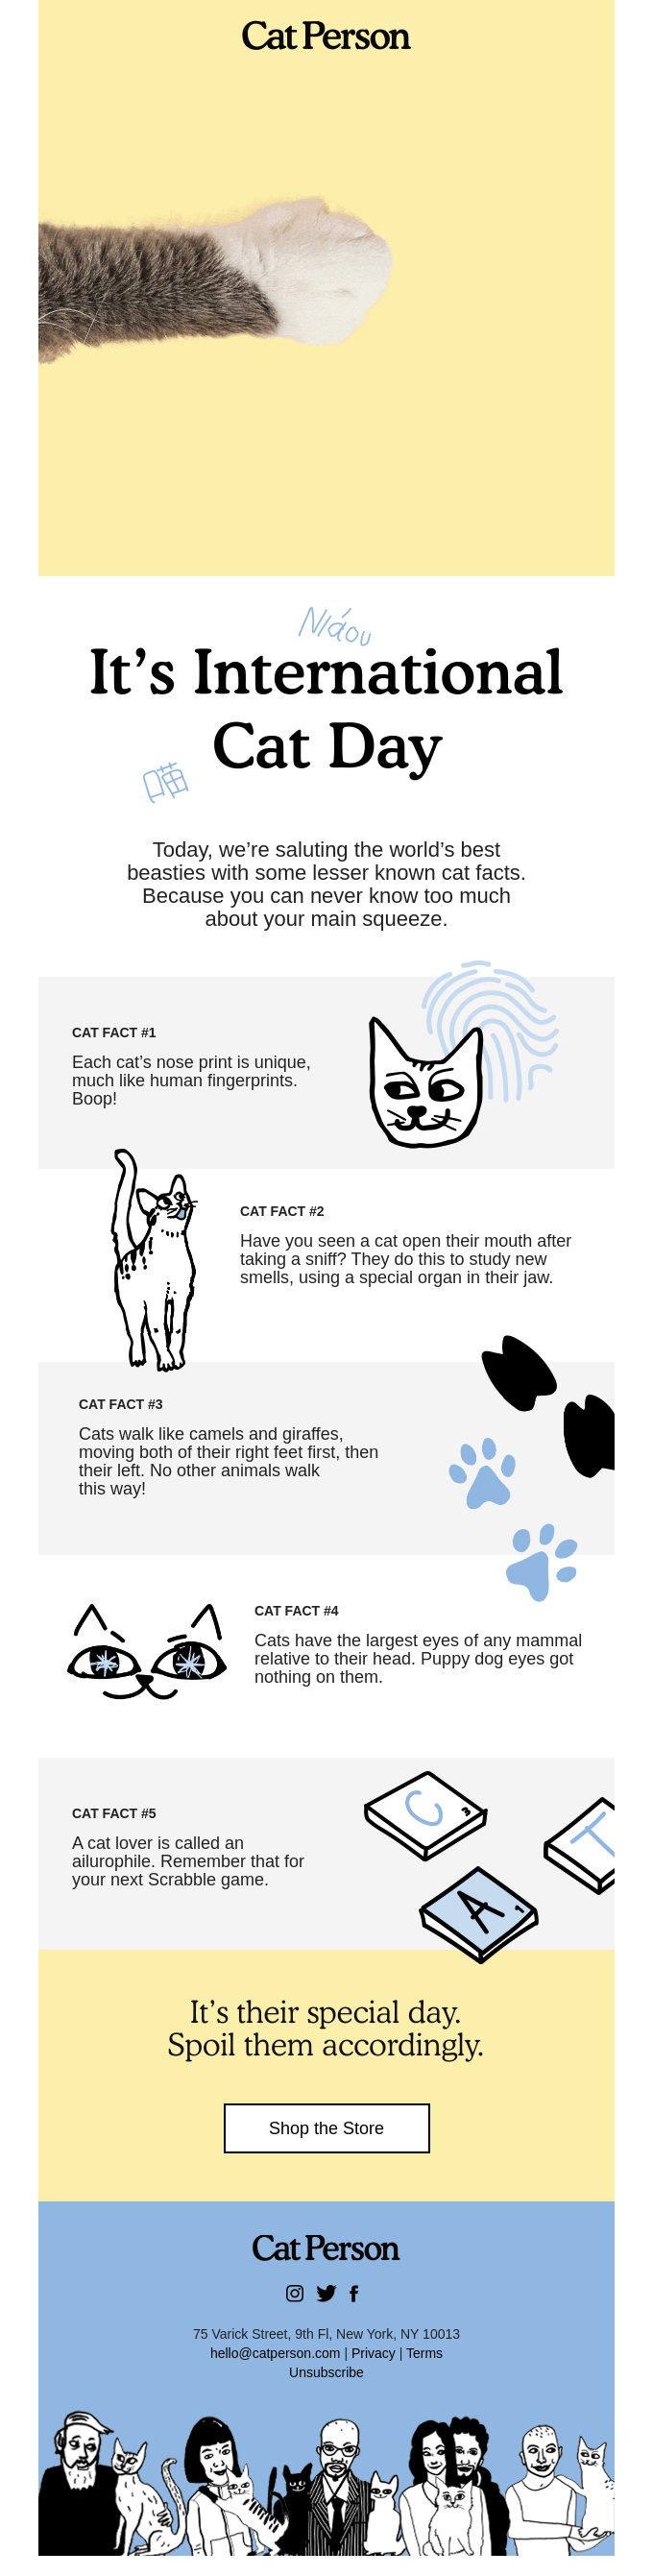 How much do you really know about your cat?